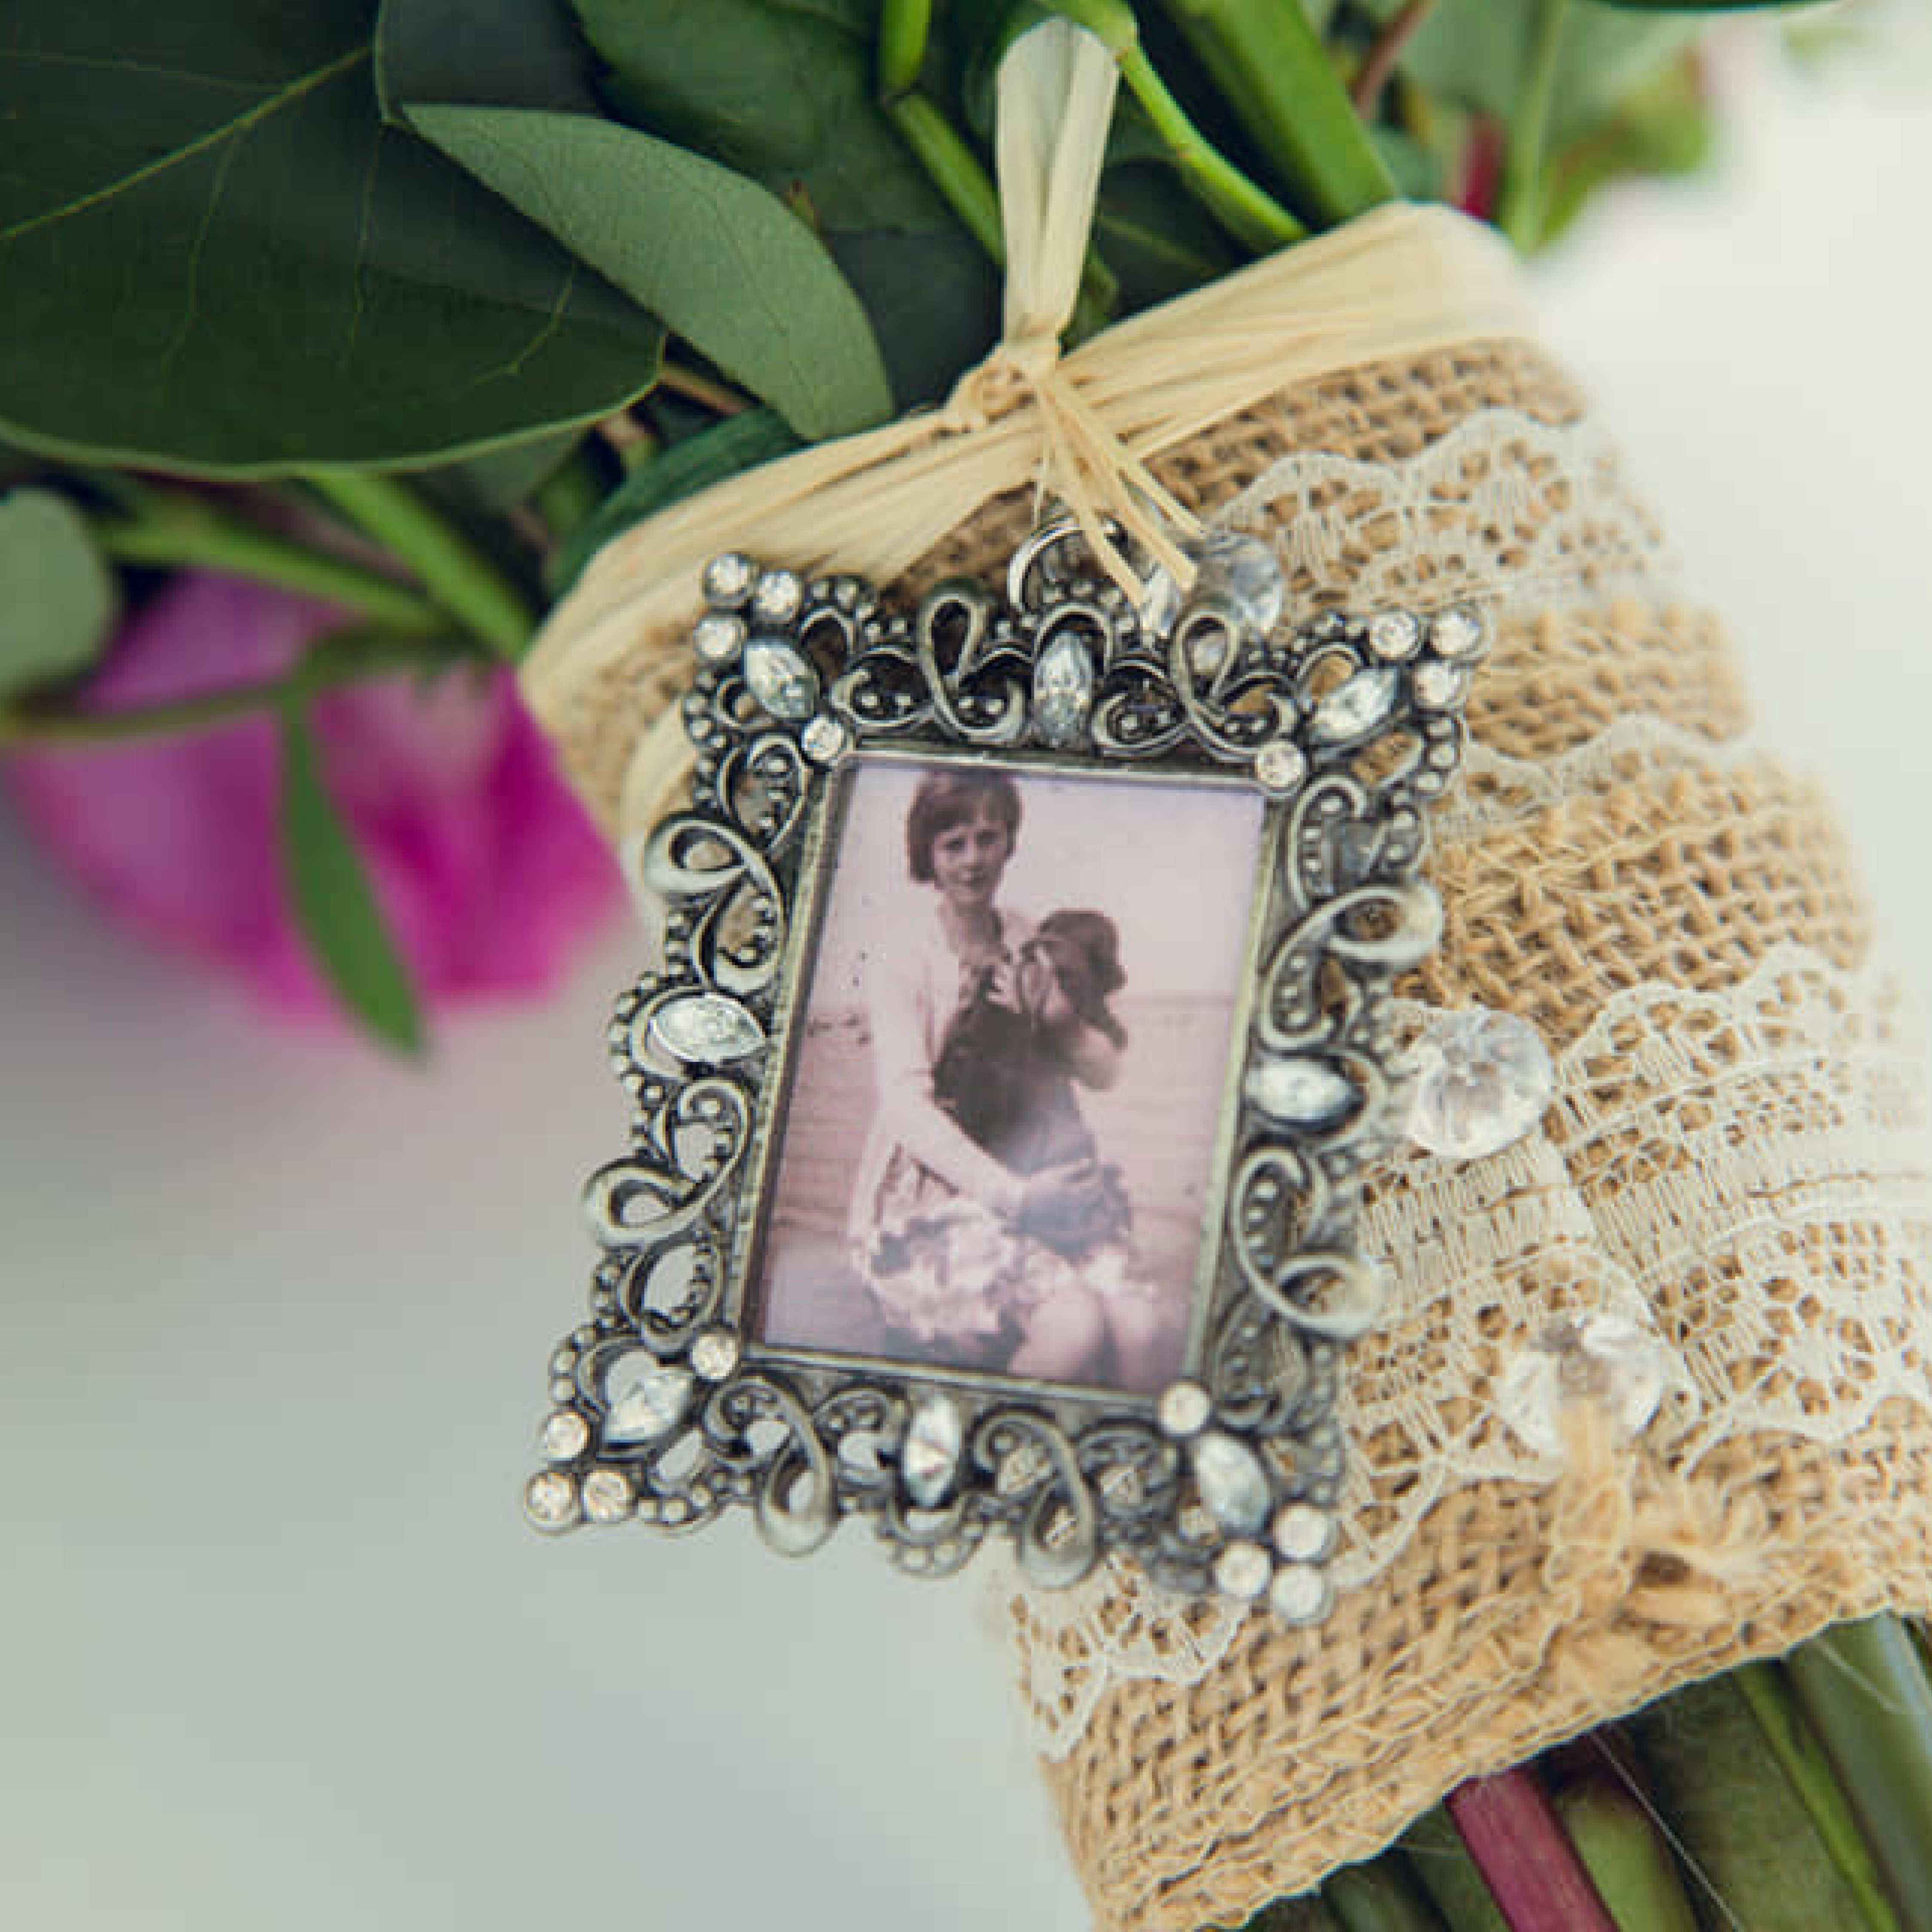 Bridal bouquet charm to remember lost loved ones on your wedding day